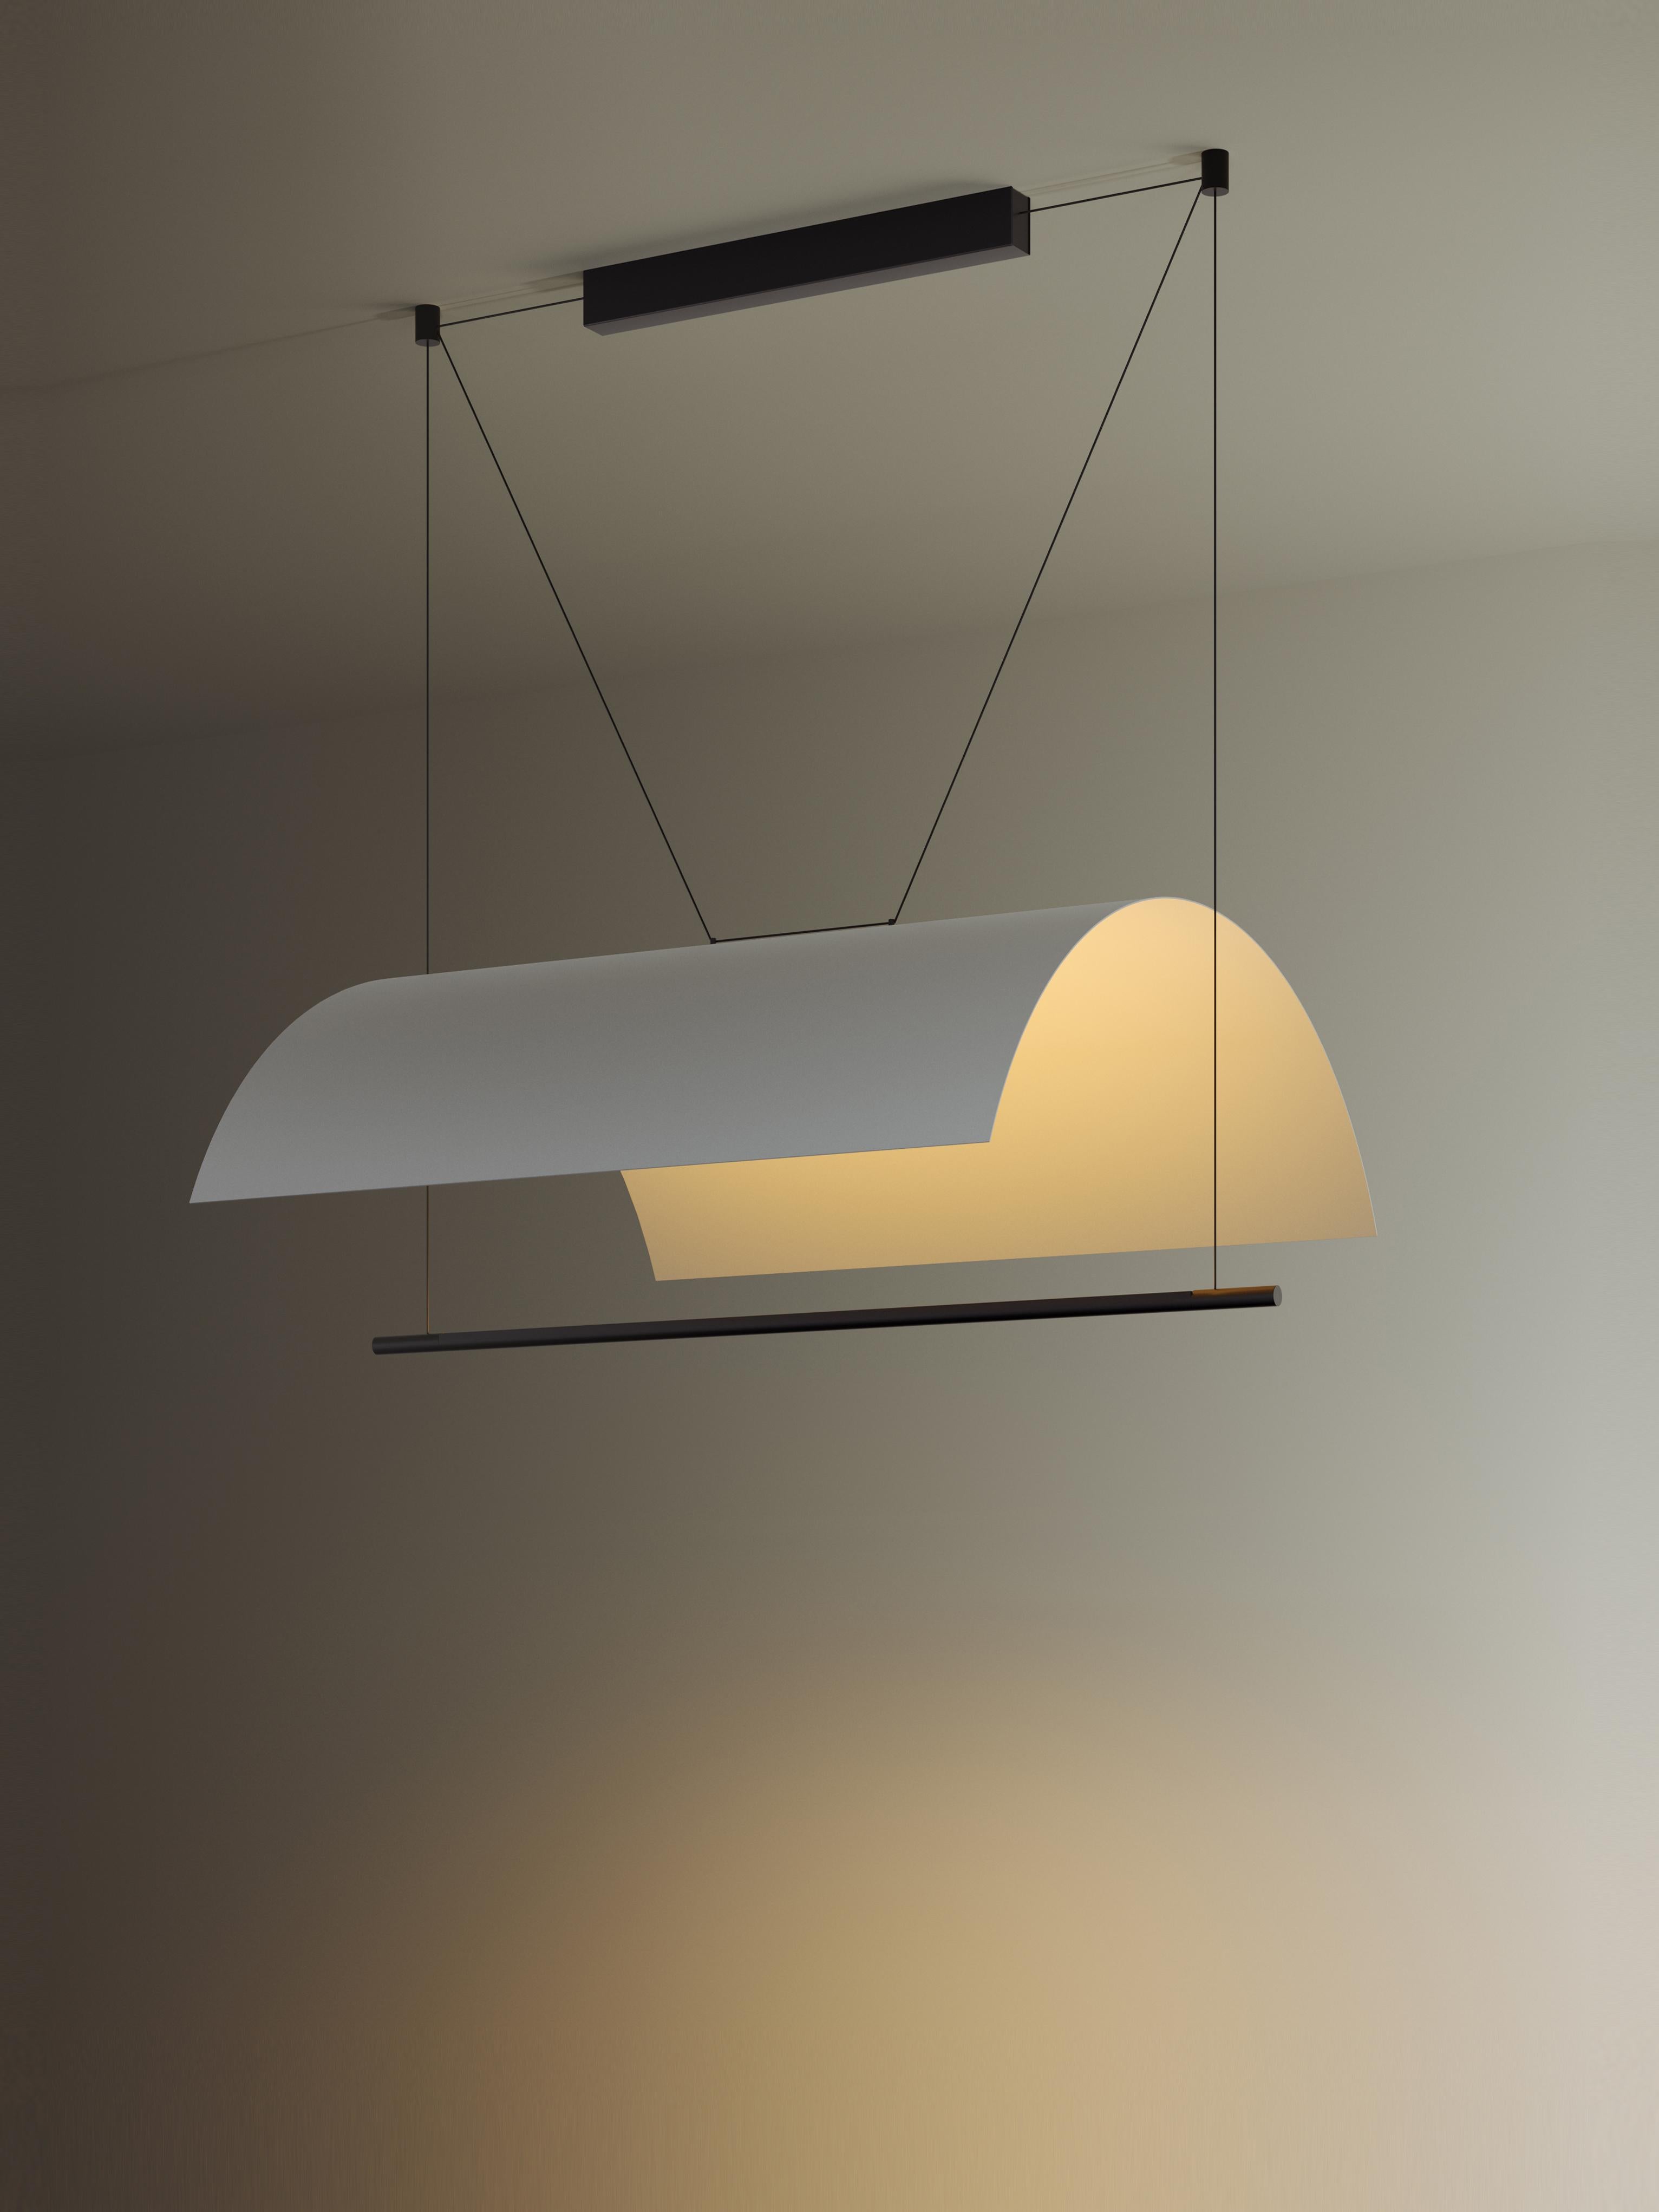 Lámina Mayor pendant lamp by Antoni Arola.
Dimensions: D 98.7 x W 80 x H 35 cm.
Materials: Metal, plastic.

A line of light and a thin metal sheet create a soft but effective levity. A marriage of the poetic and the practical, Lámina is a system